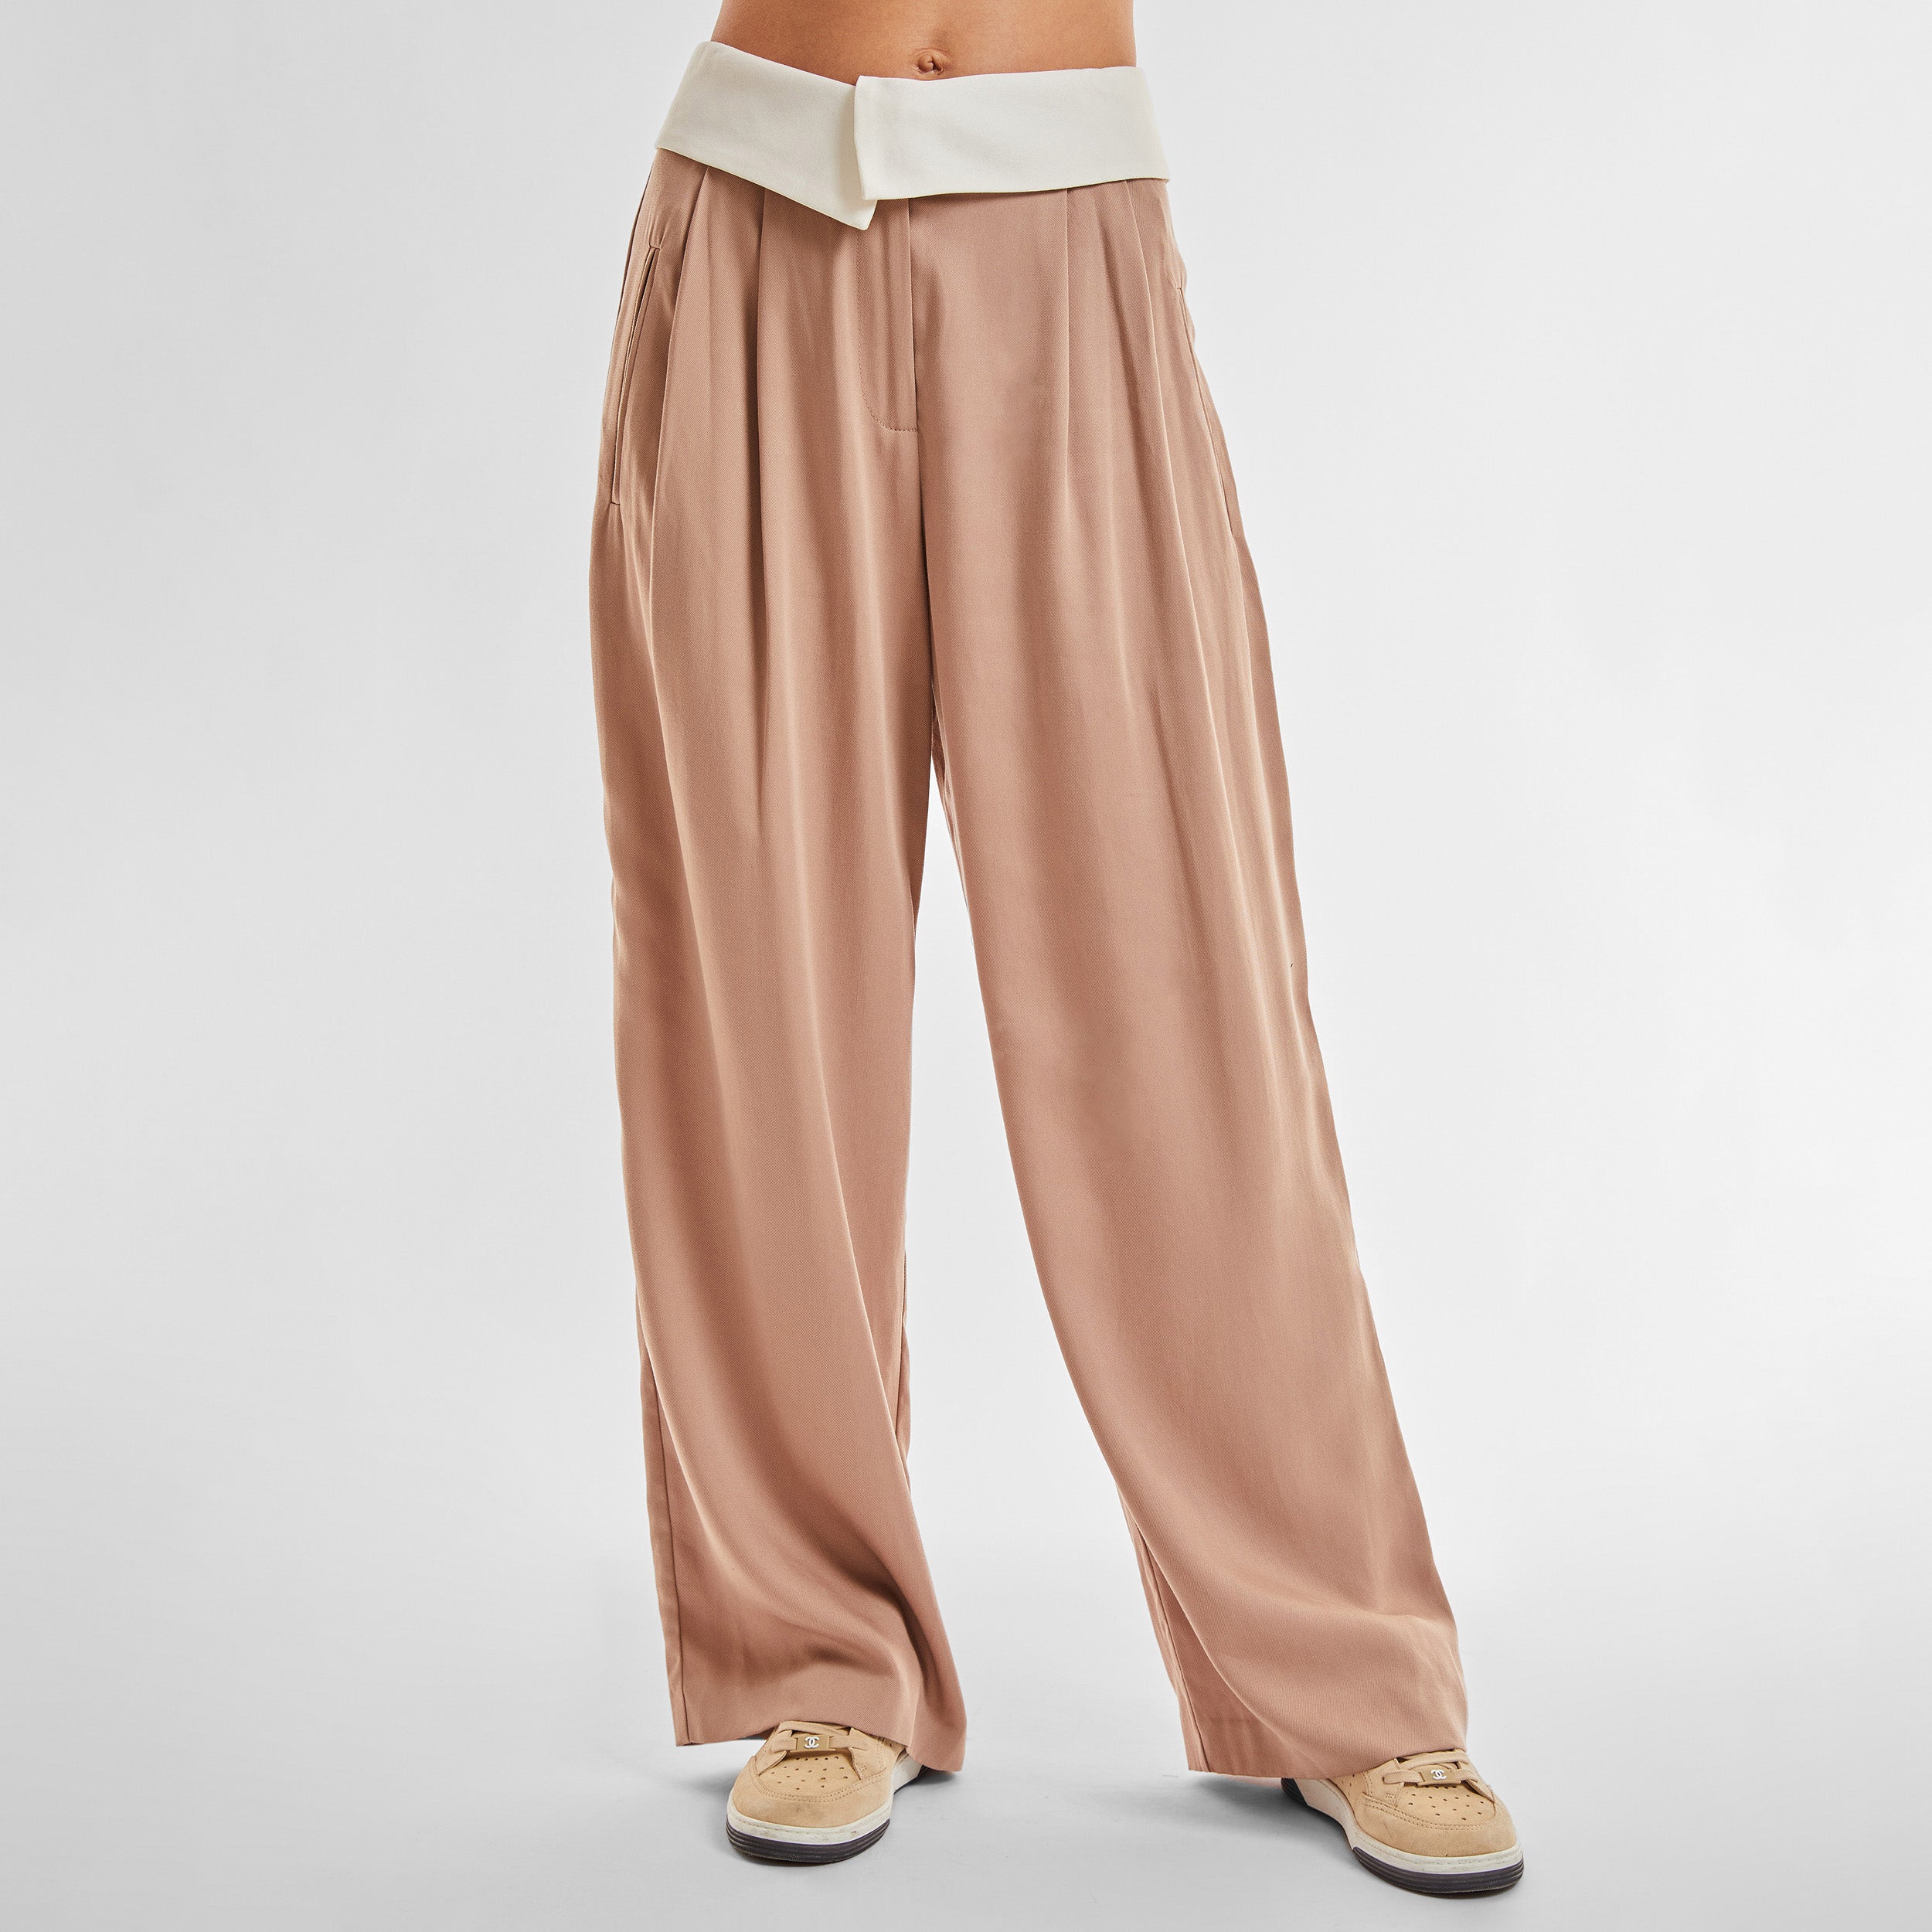 Front view of woman wearing light brown trousers with white foldover waistband detail.